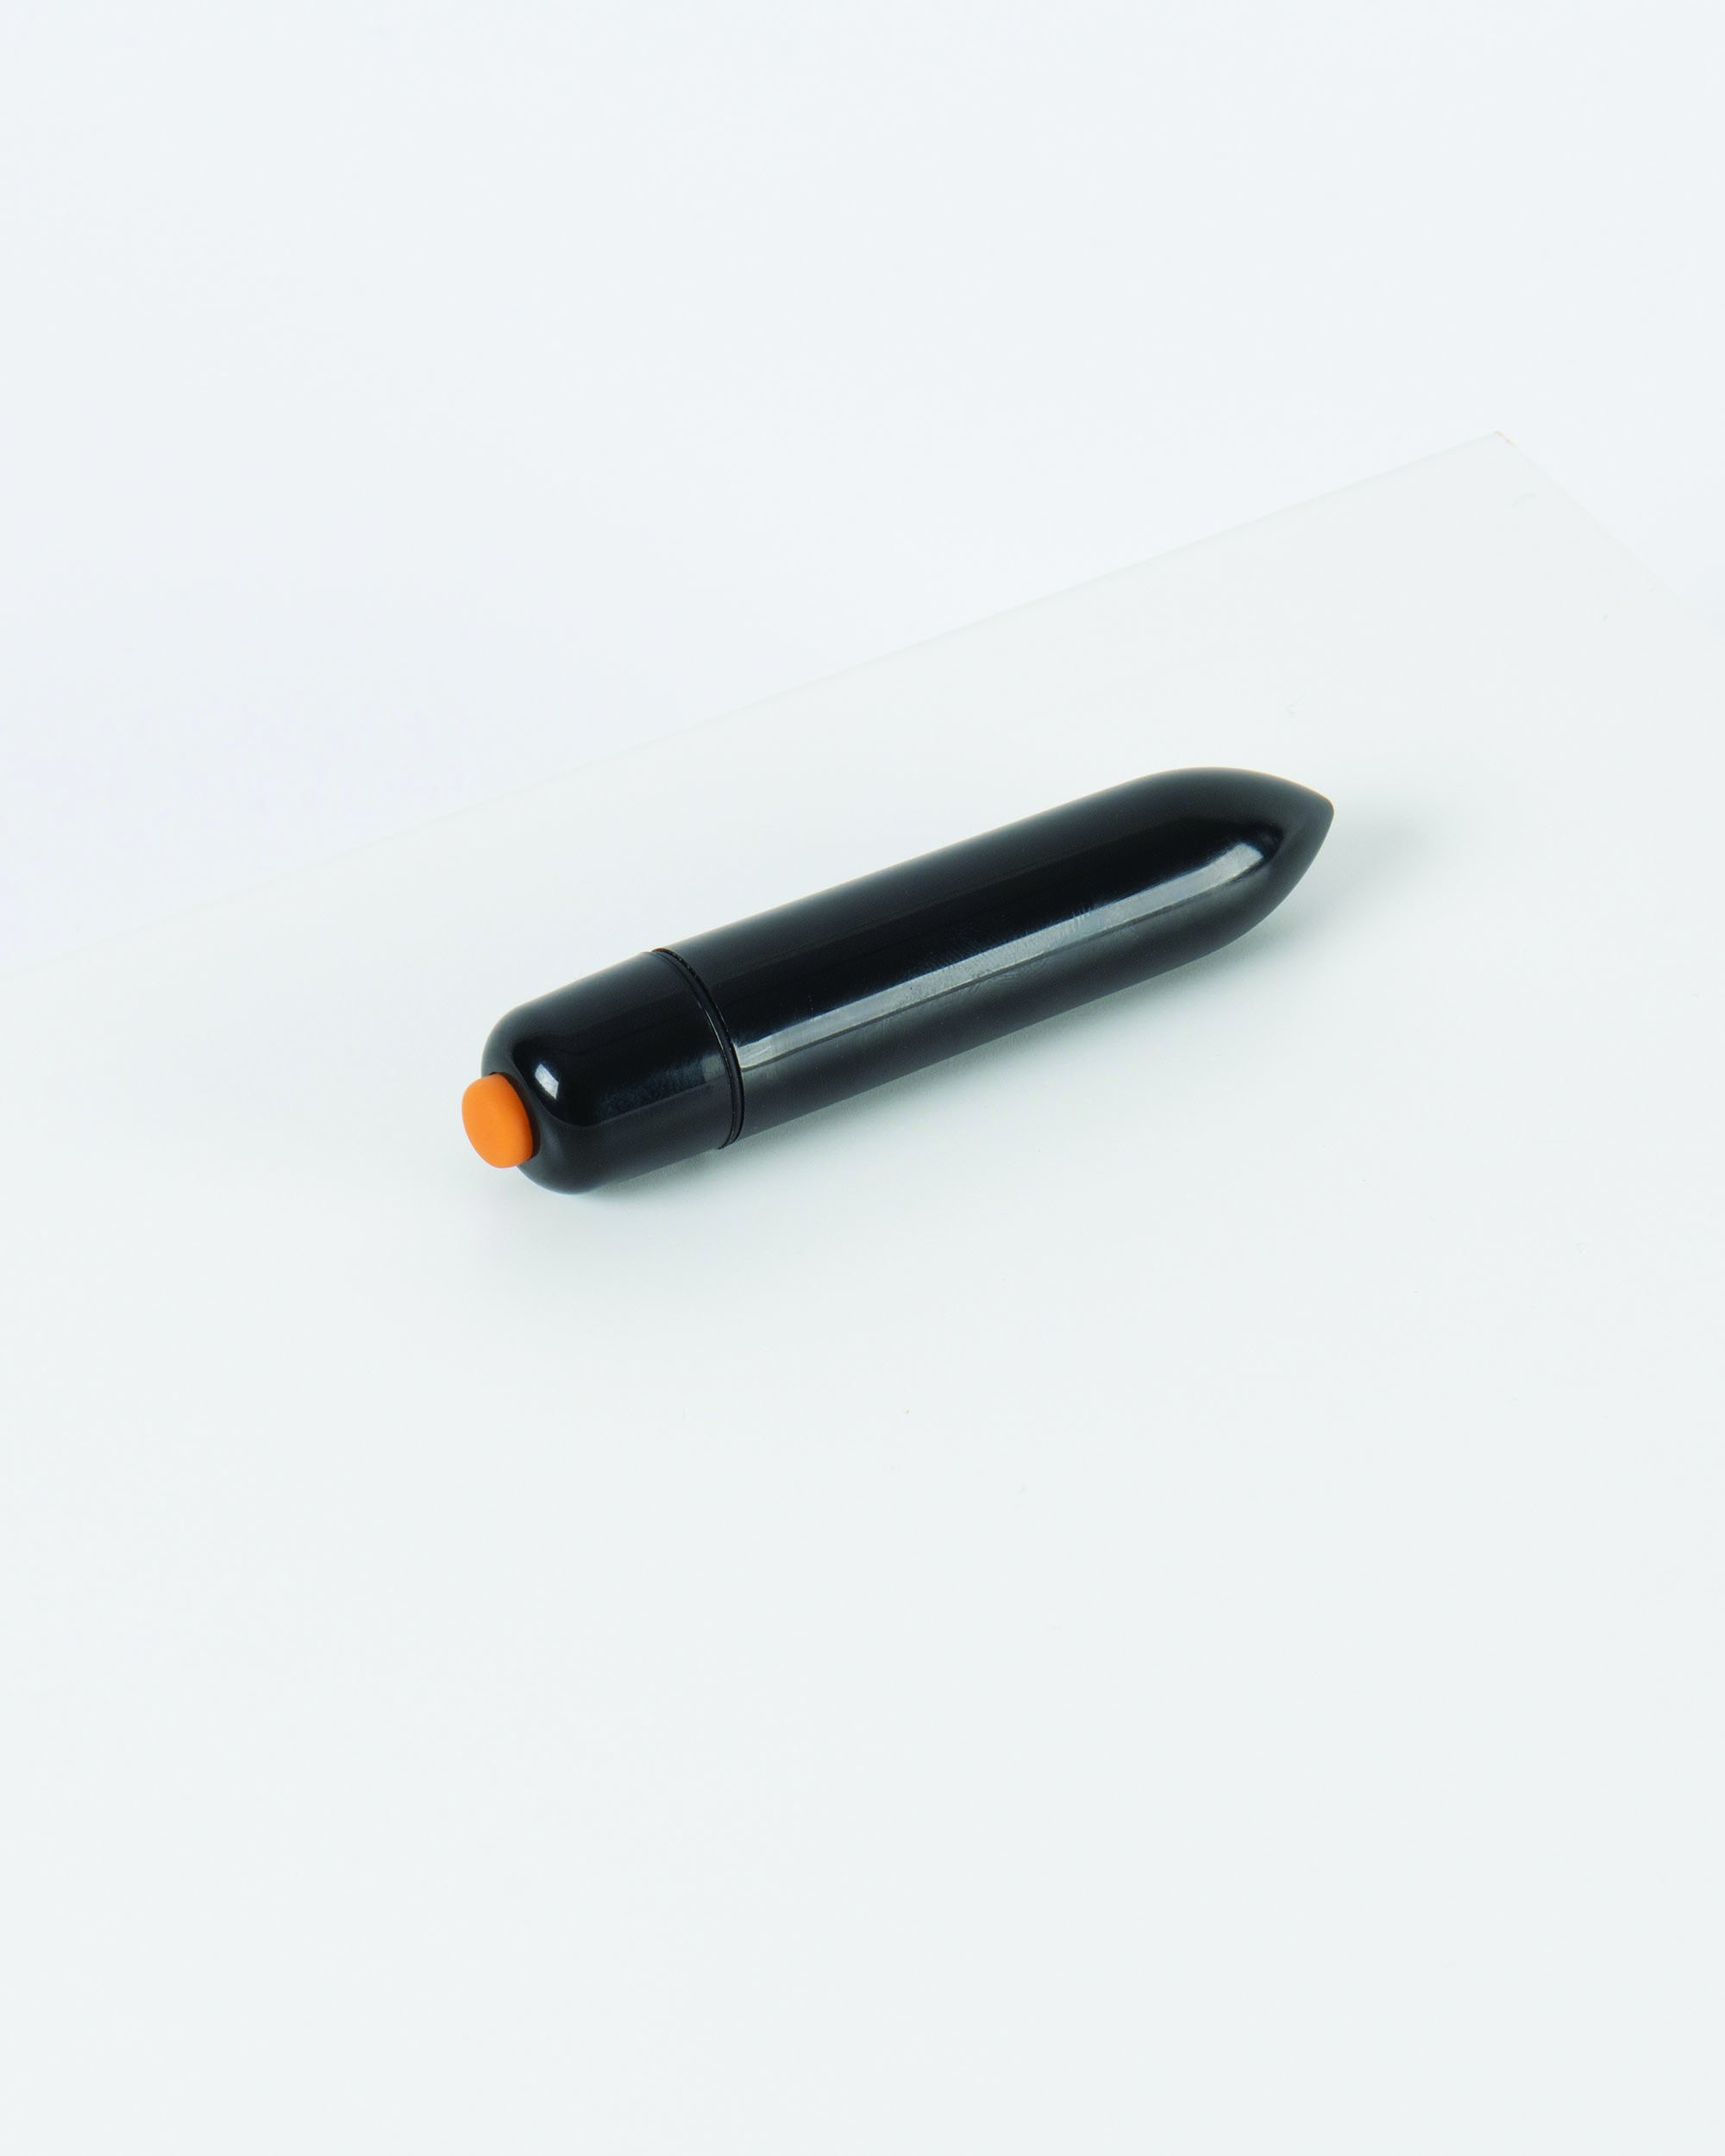 The classic staple that should be in everyone's sex toy collection, the sleek bullet vibrator offers unlimited pleasurable possibilities.Ã‚Â  With seven powerful vibration settings, our bullet vibe can be used as anything from a clit stimulator for her #sex